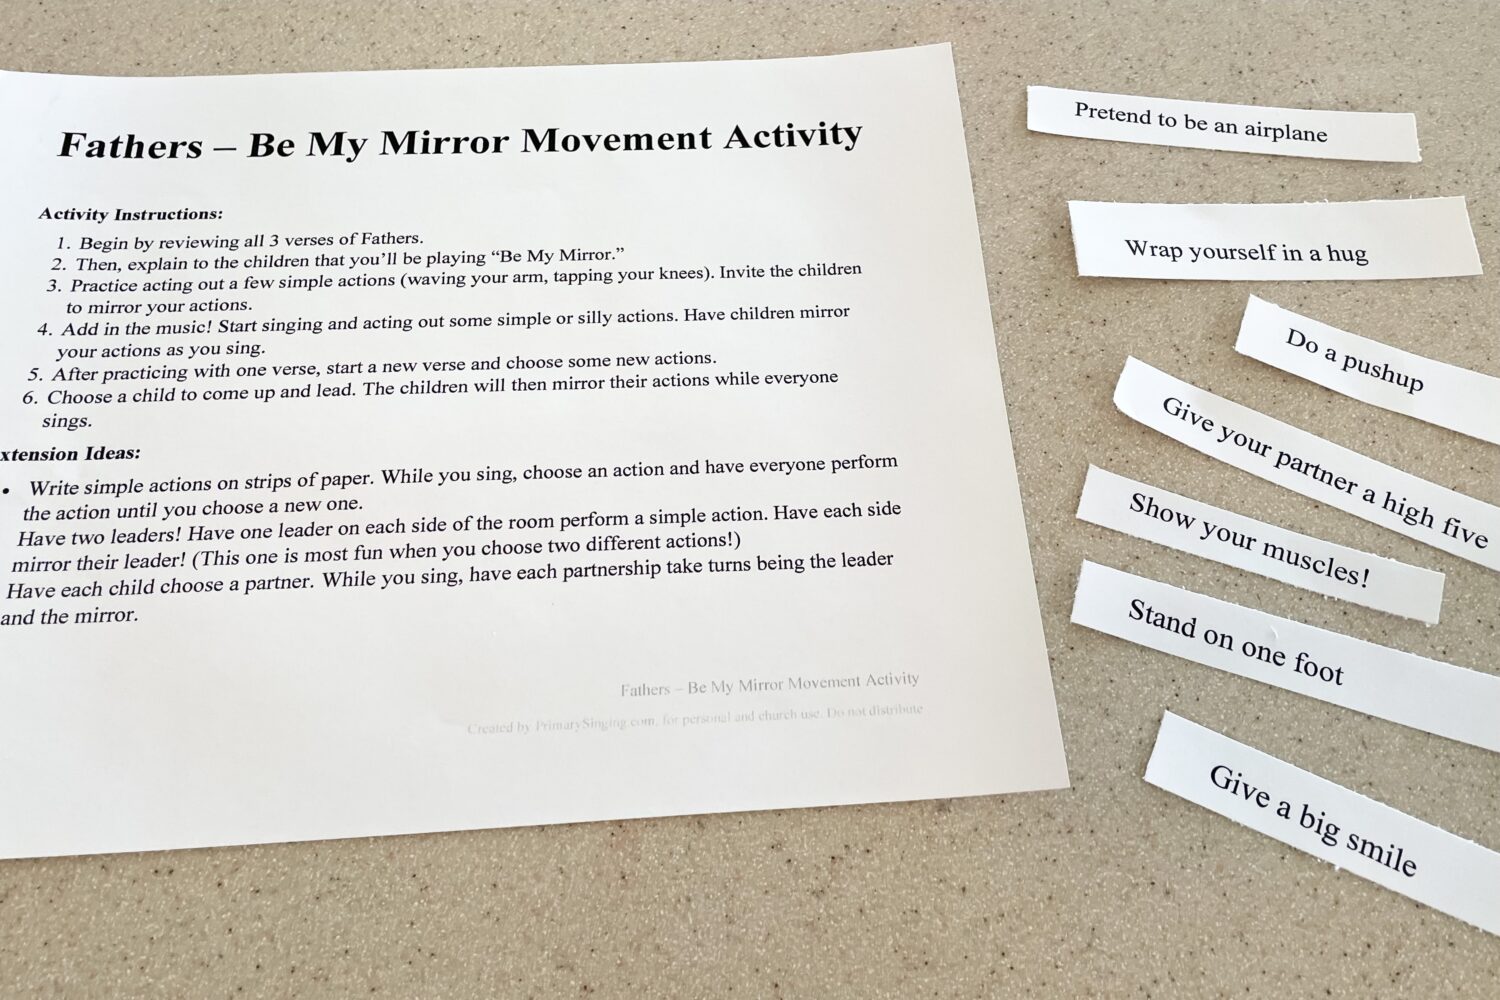 Fathers Be My Mirror Movement Activity Singing time ideas for Primary Music Leaders IMG 6646 e1654983696553